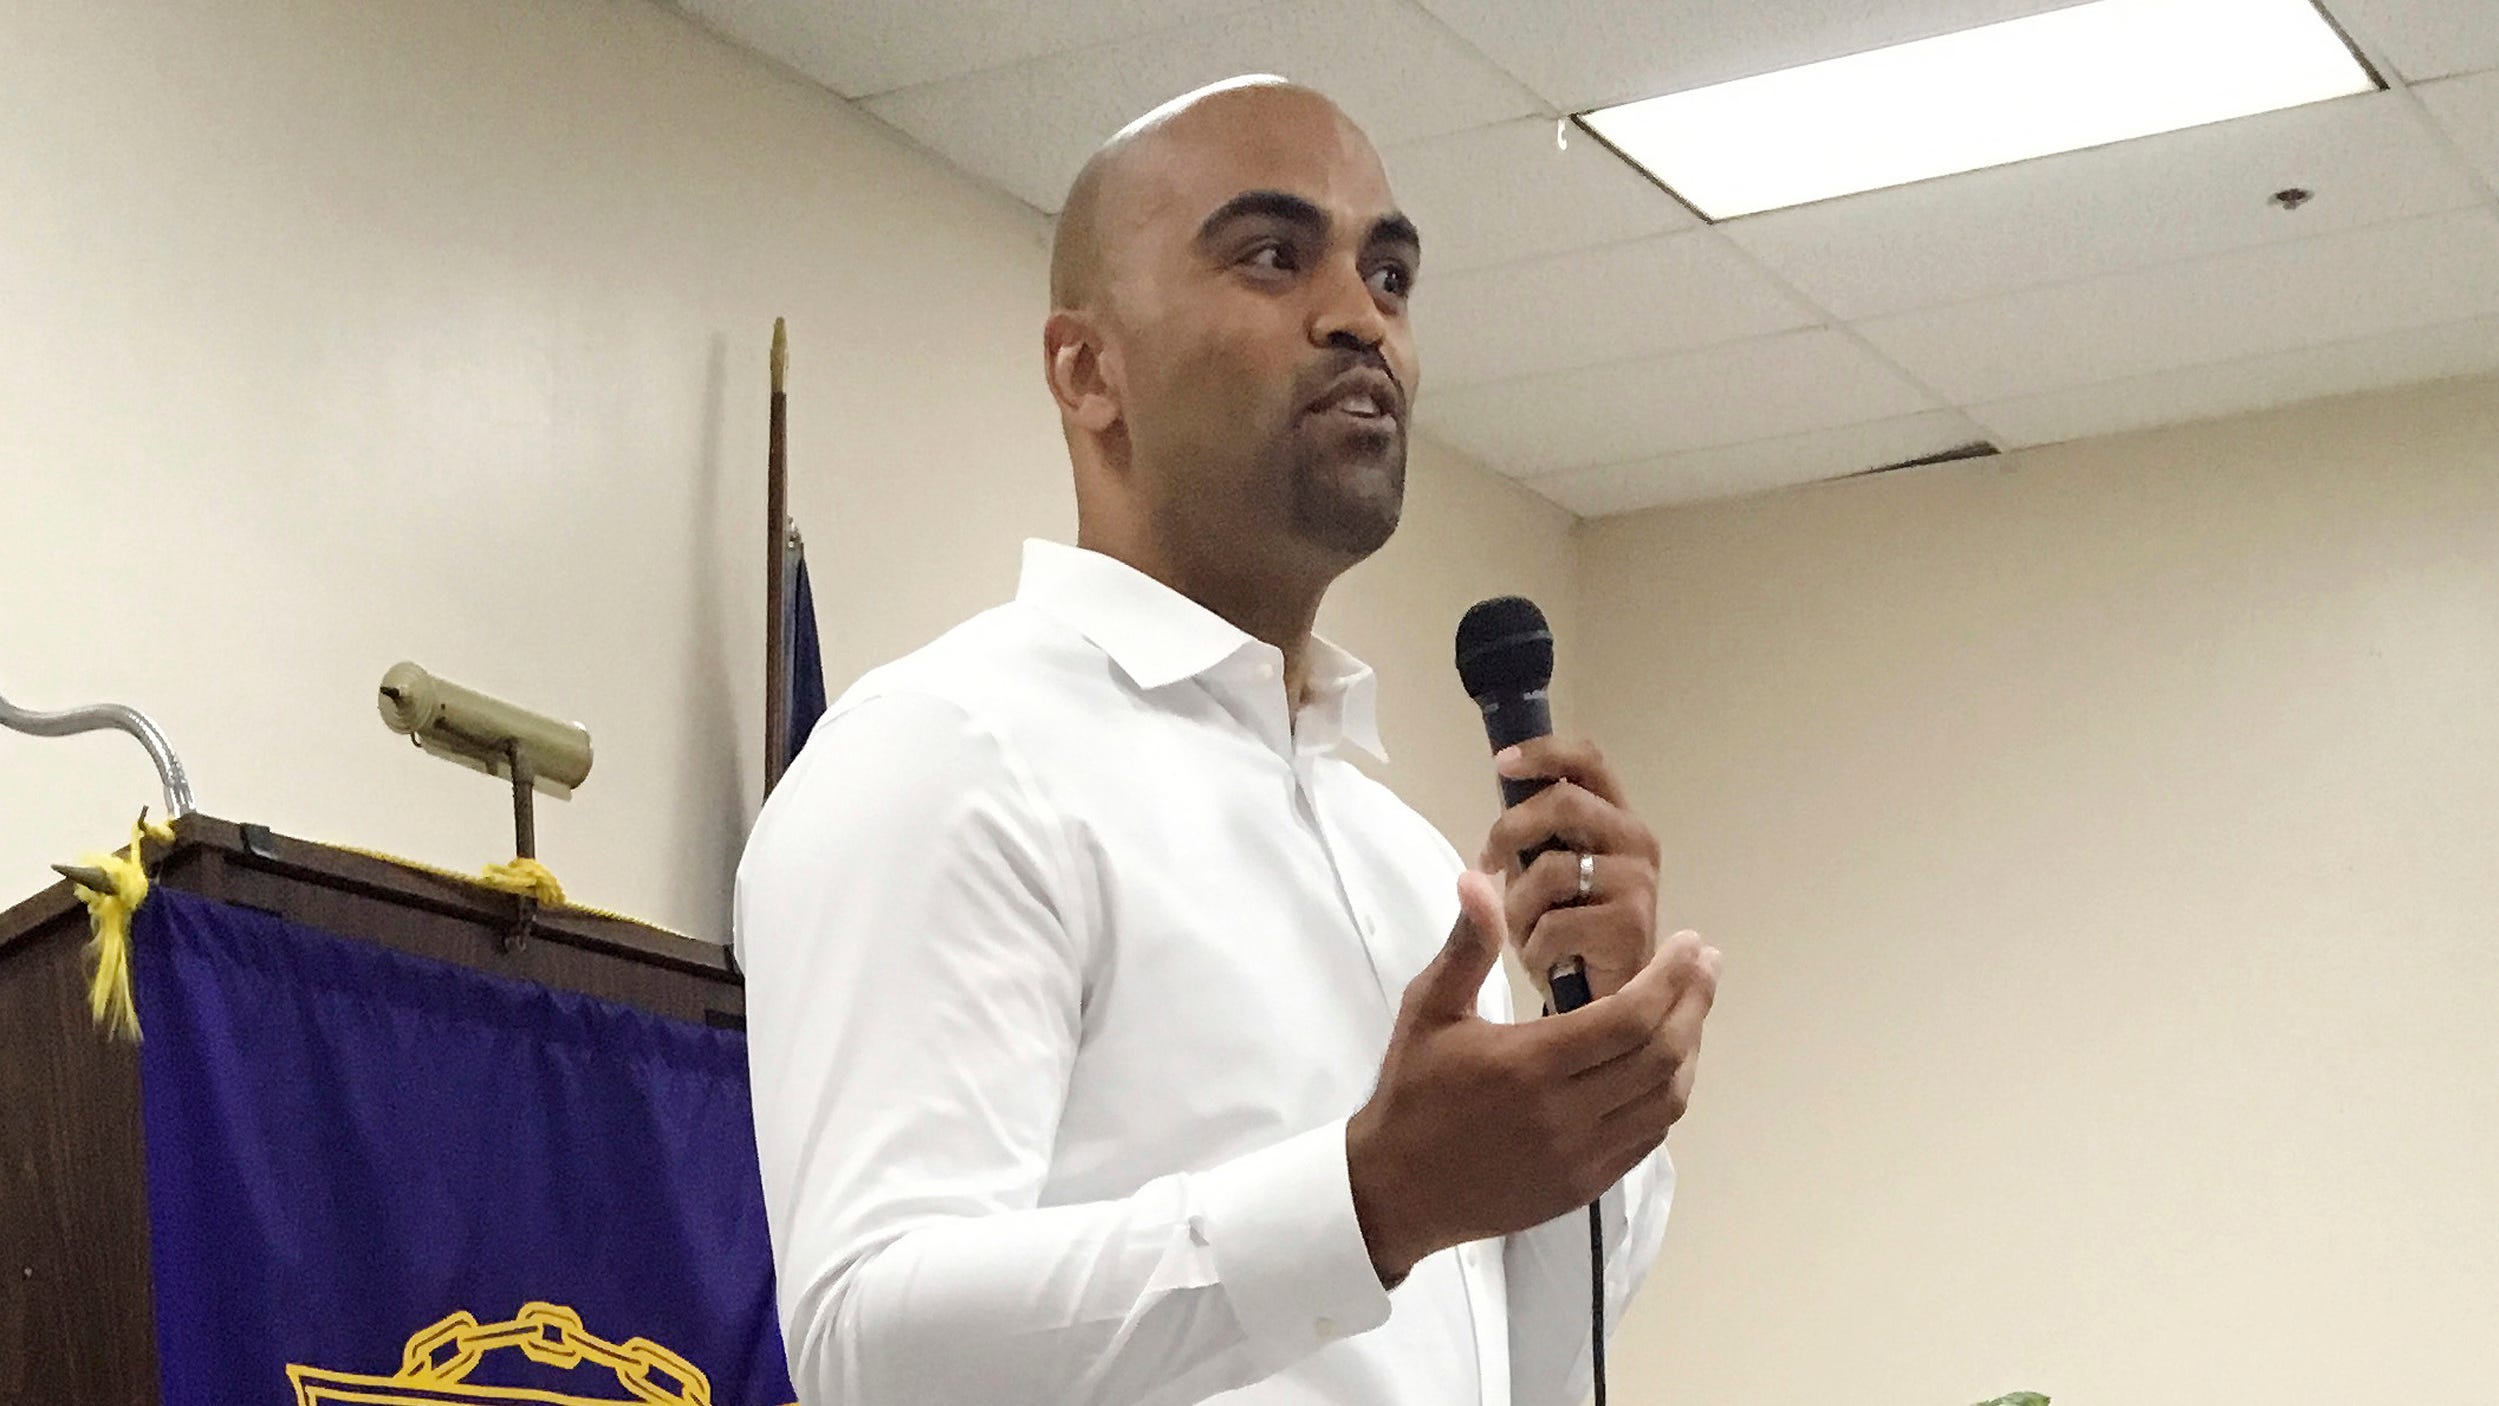 Colin Allred: Former NFL linebacker. Democrat running for the U.S. House of Representatives in Texas' 32nd congressional district.